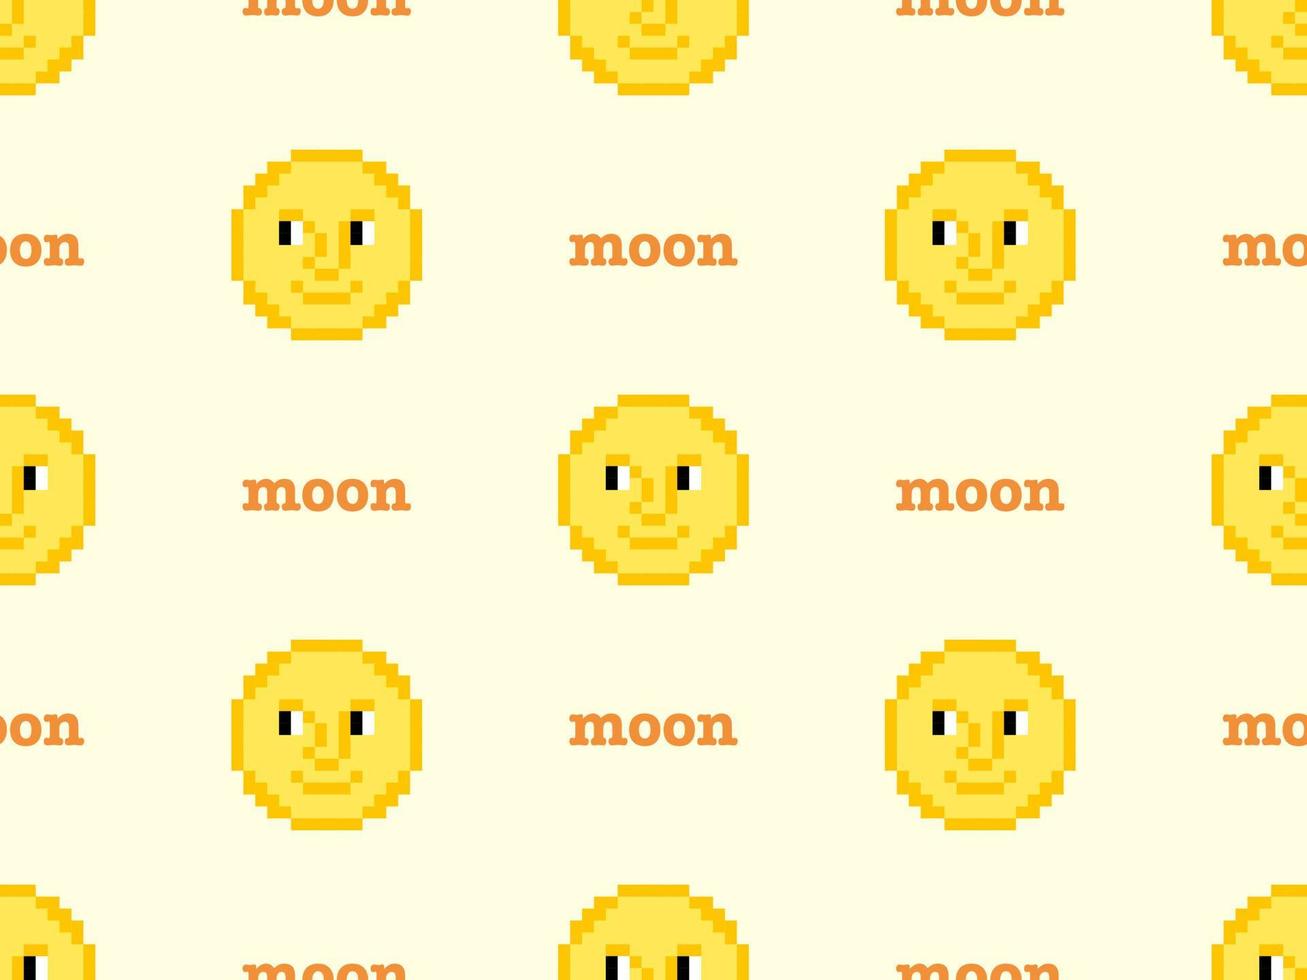 Moon cartoon character seamless pattern on yellow background.Pixel style vector